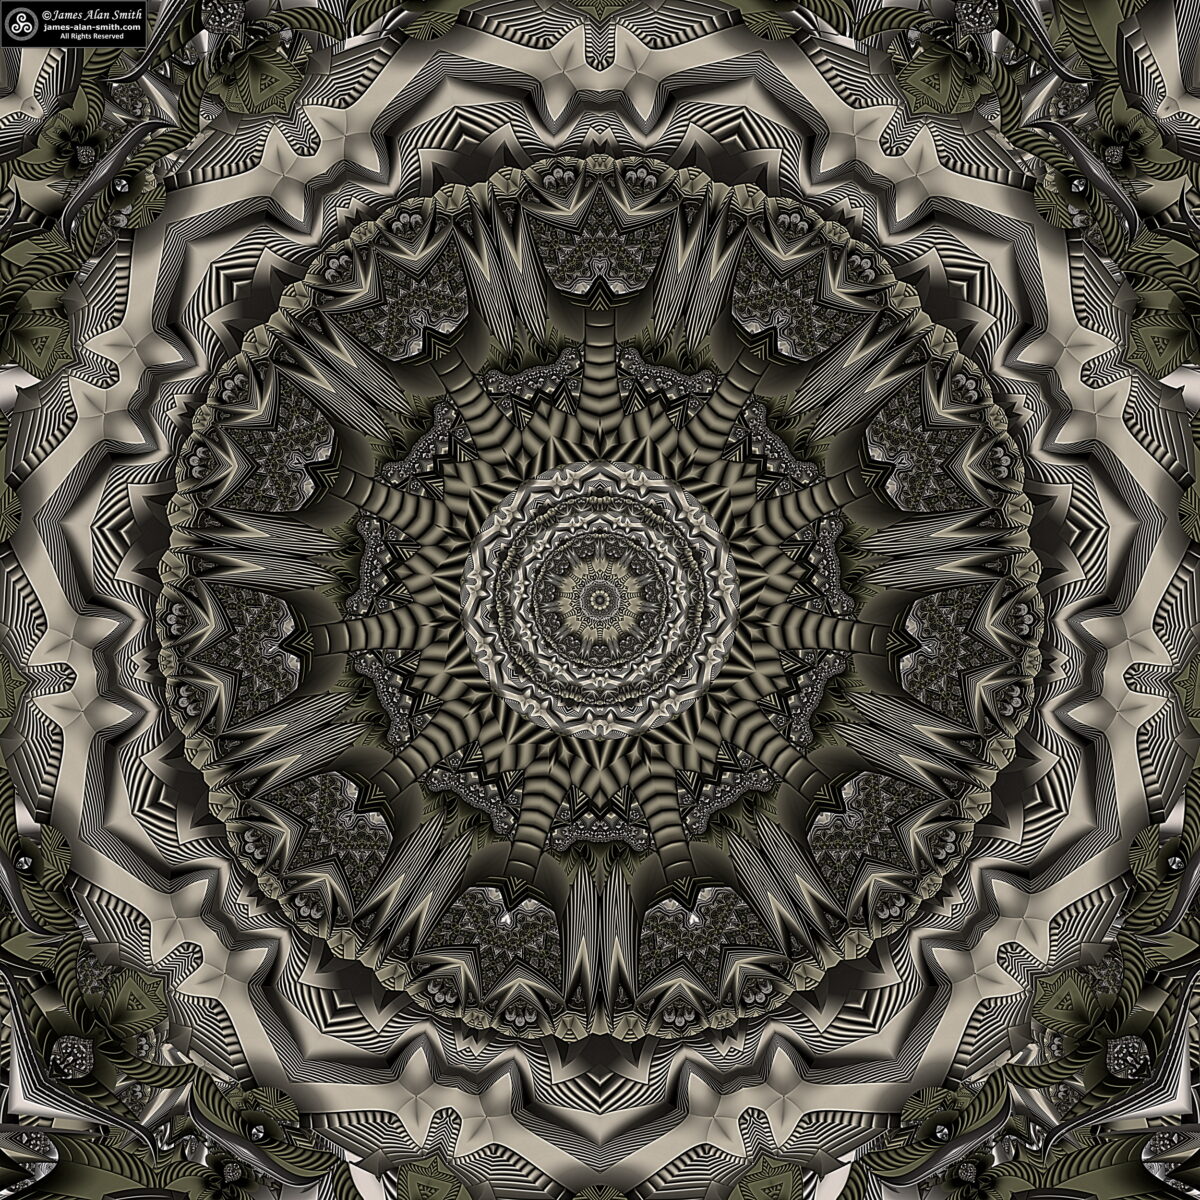 The Eleventh Mandala of Creation: Artwork by James Alan Smith